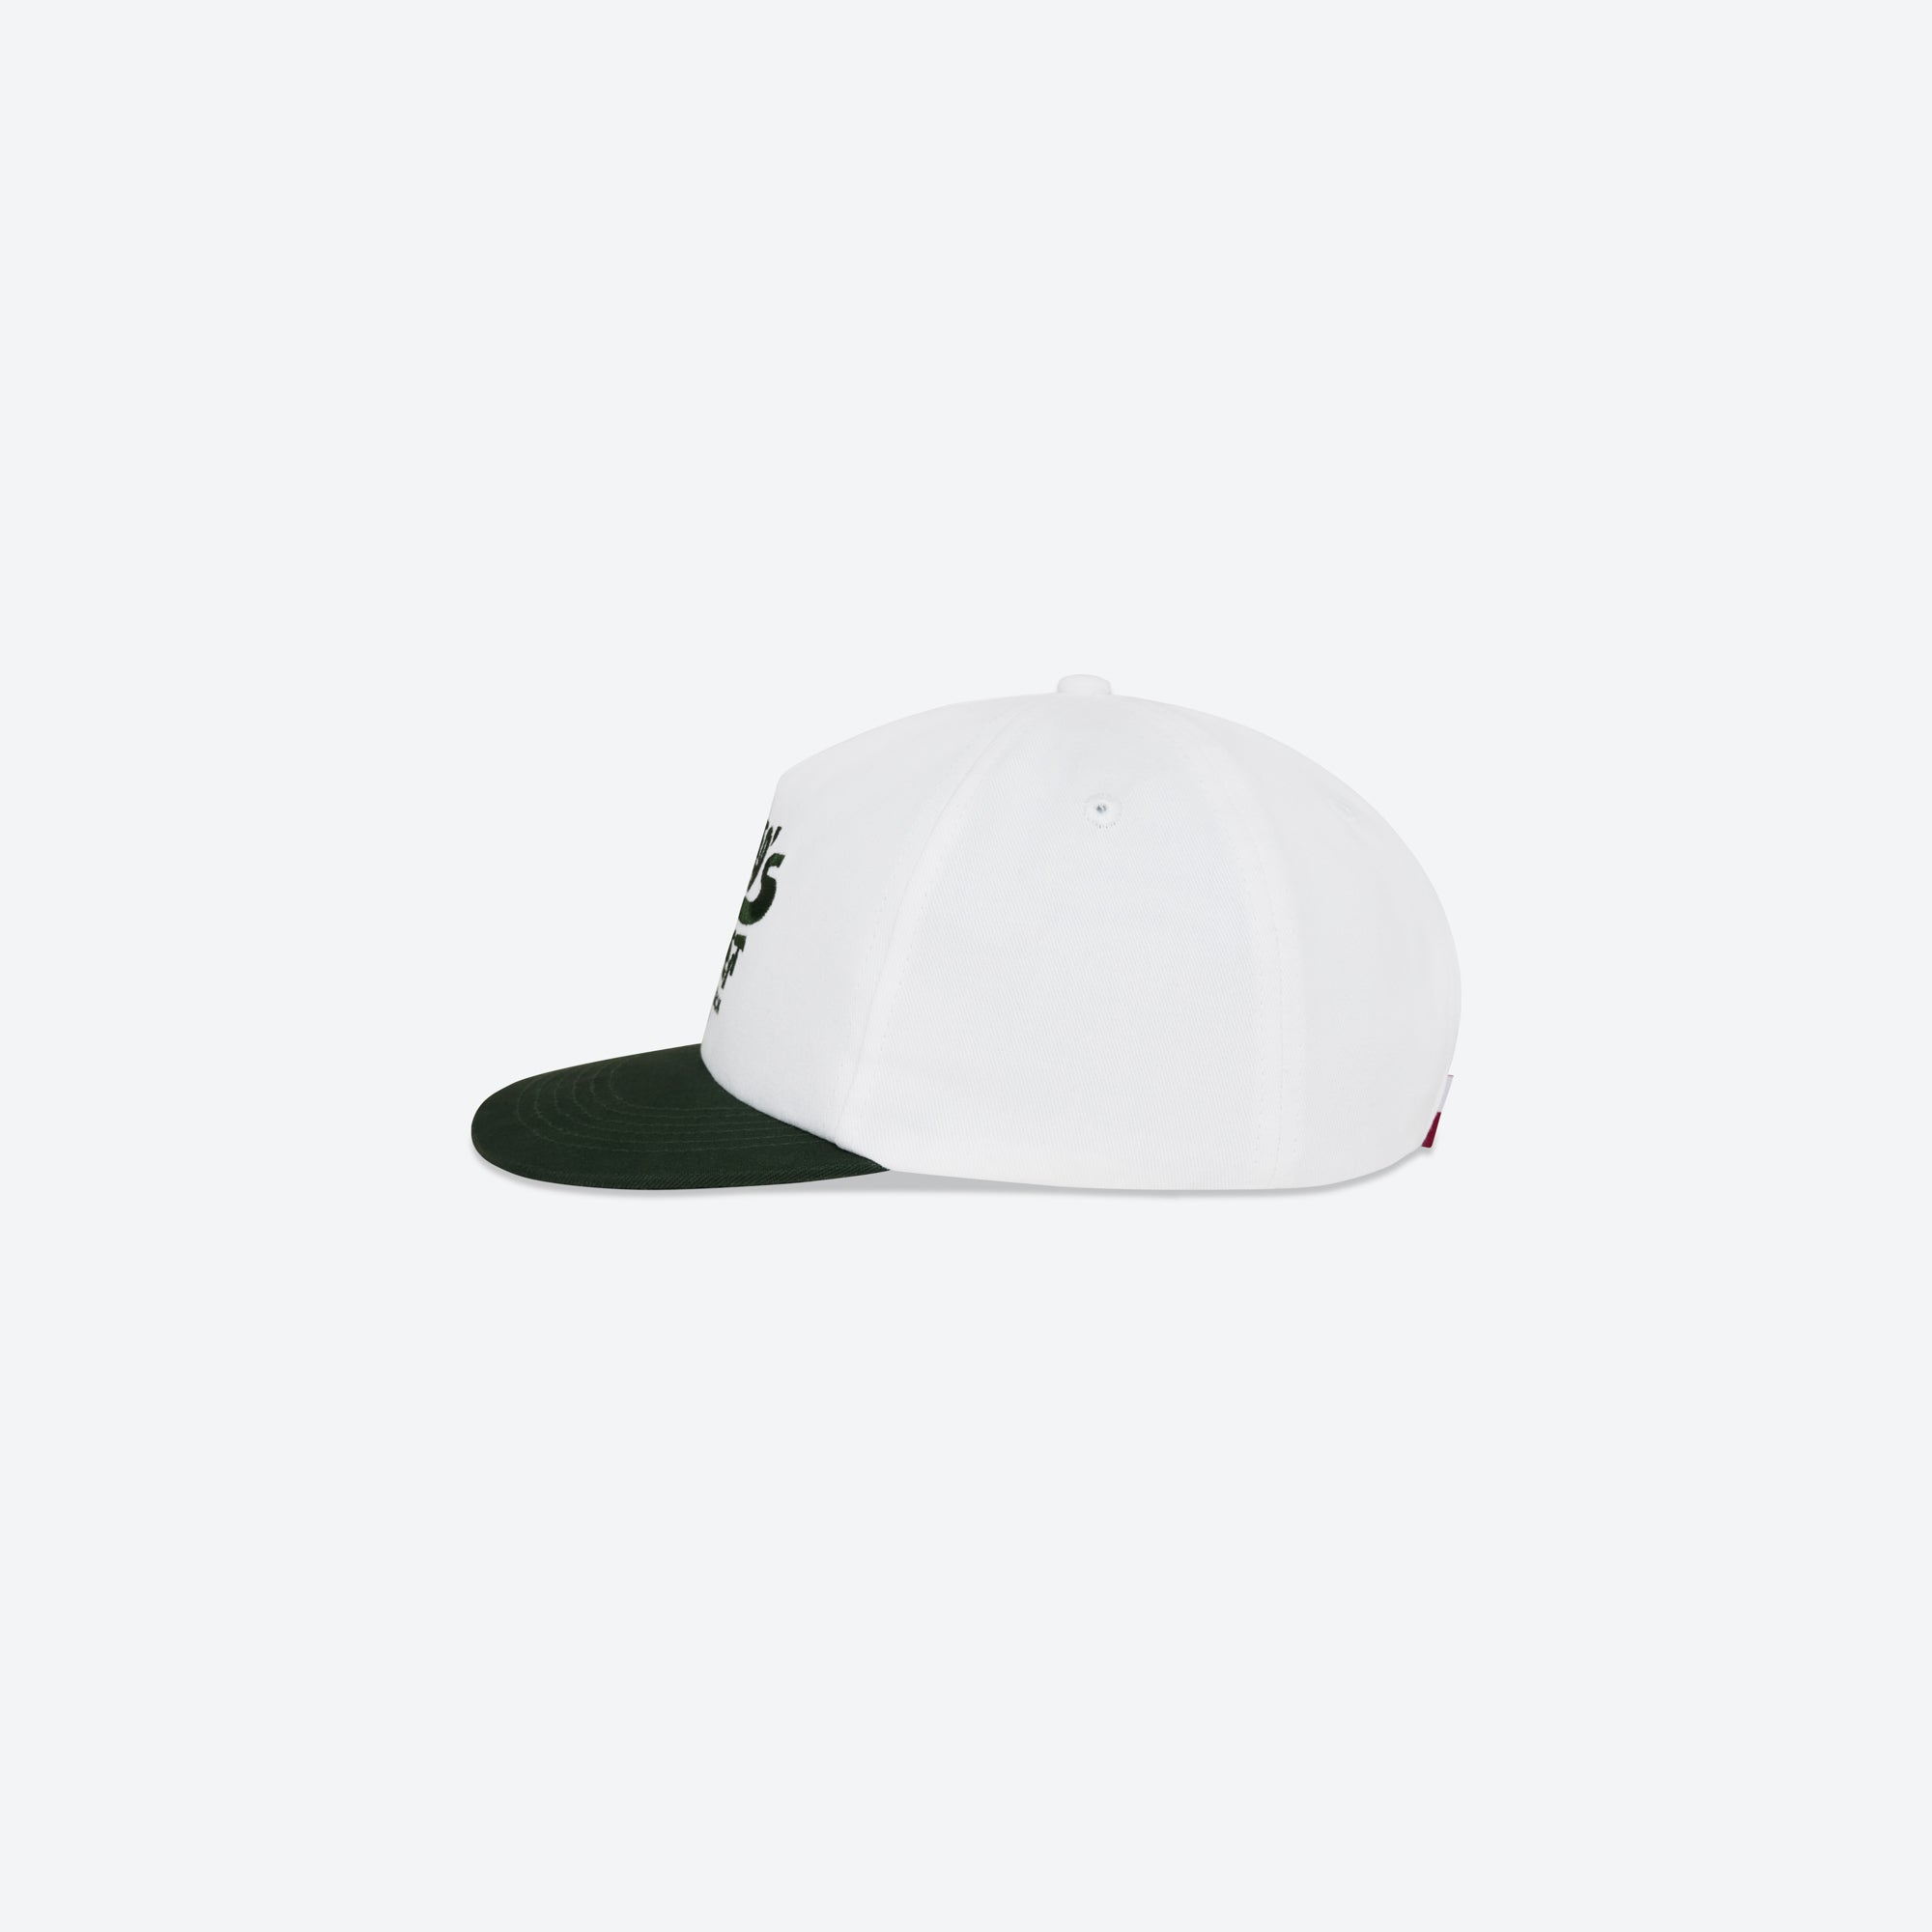 Alfred's Apartment - OG Cap - Off White / Forest